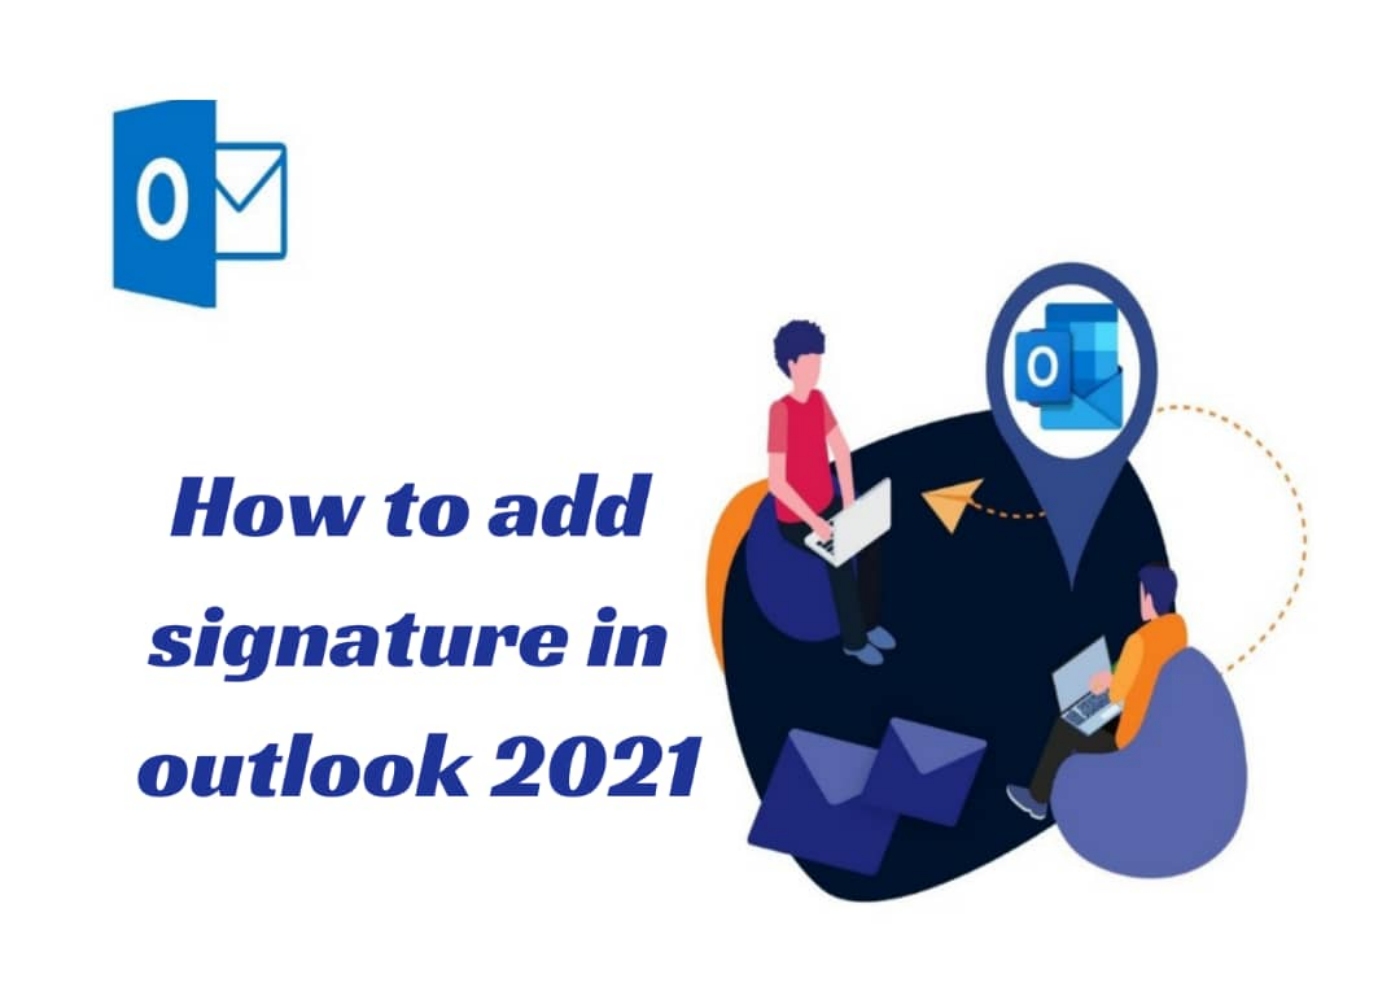 How to add Signature in Outlook 2021